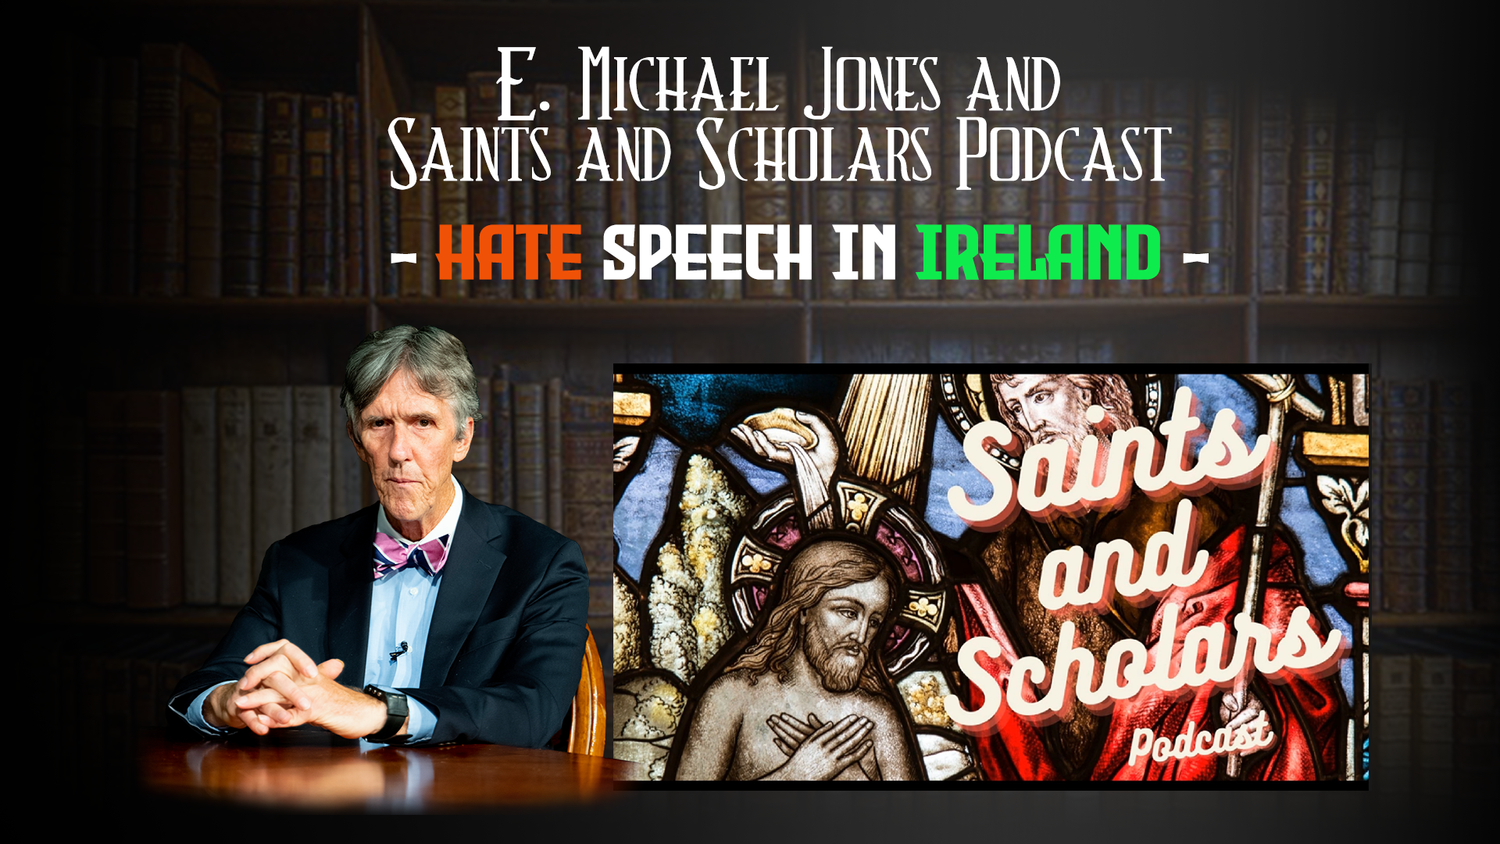 EMJ and Saints and Scholars Podcast: Hate Speech in Ireland